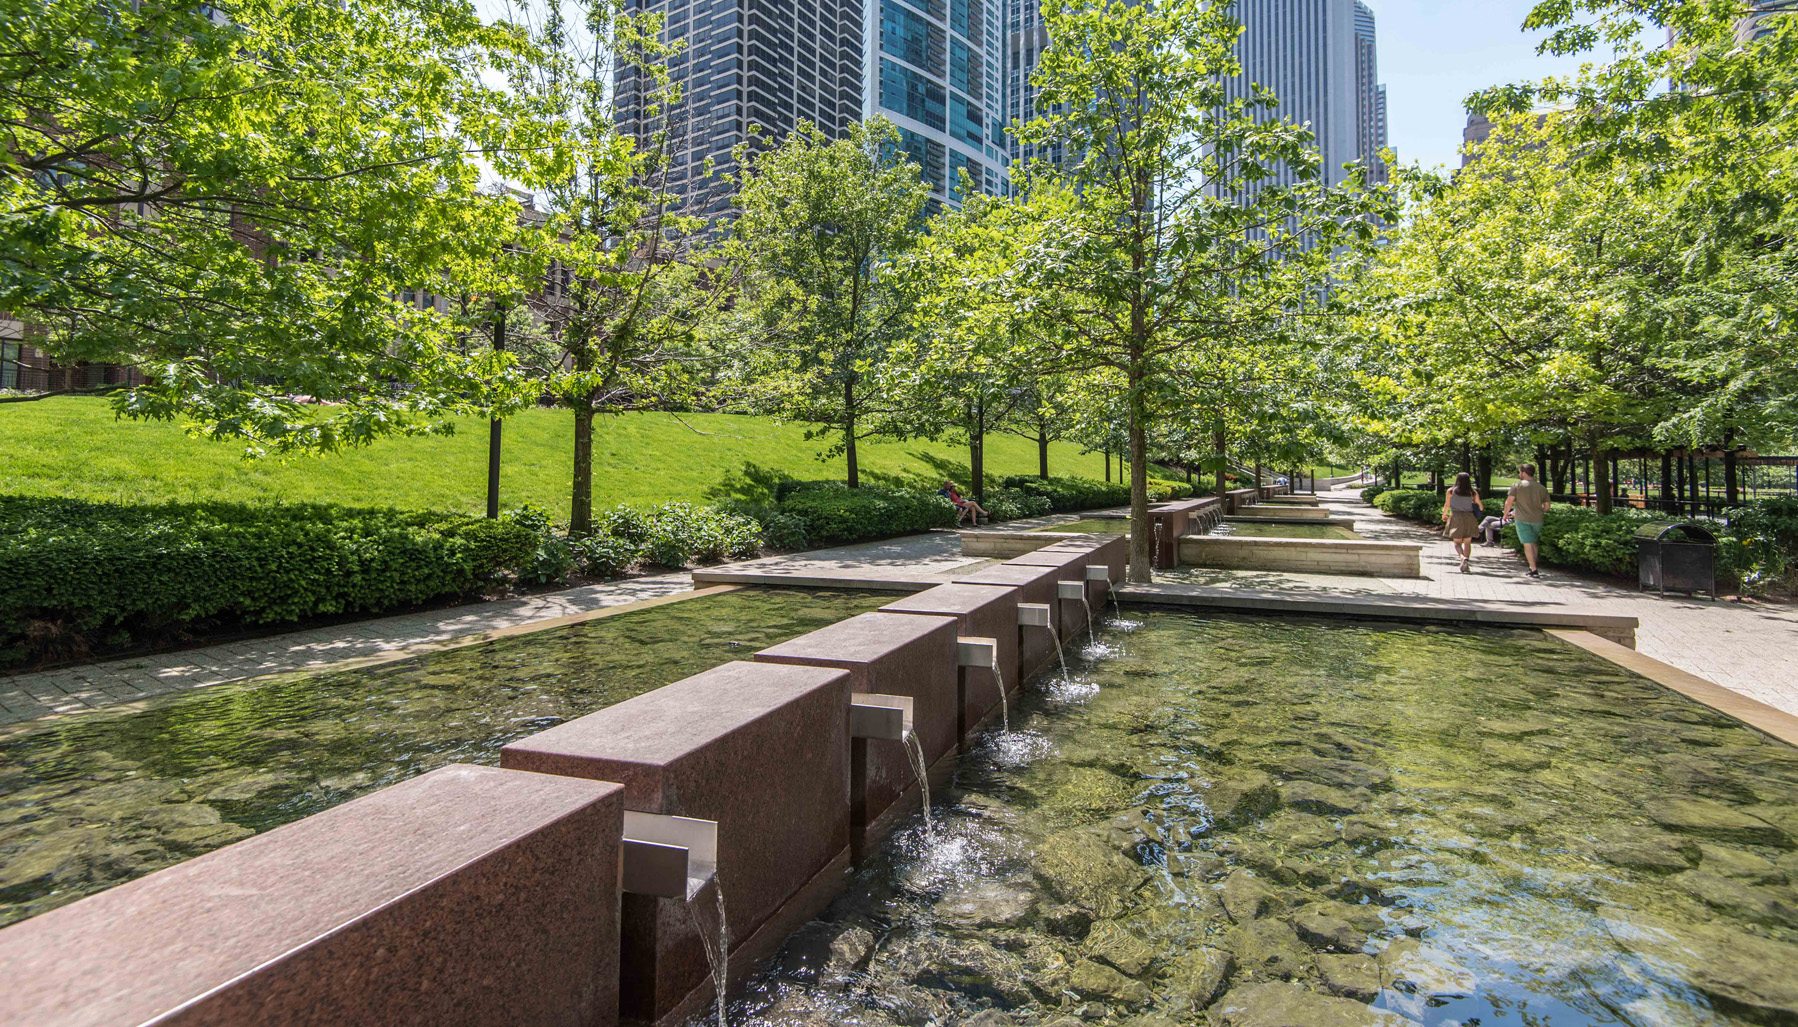 lakeshore east park - parks by the lake for lazy pm